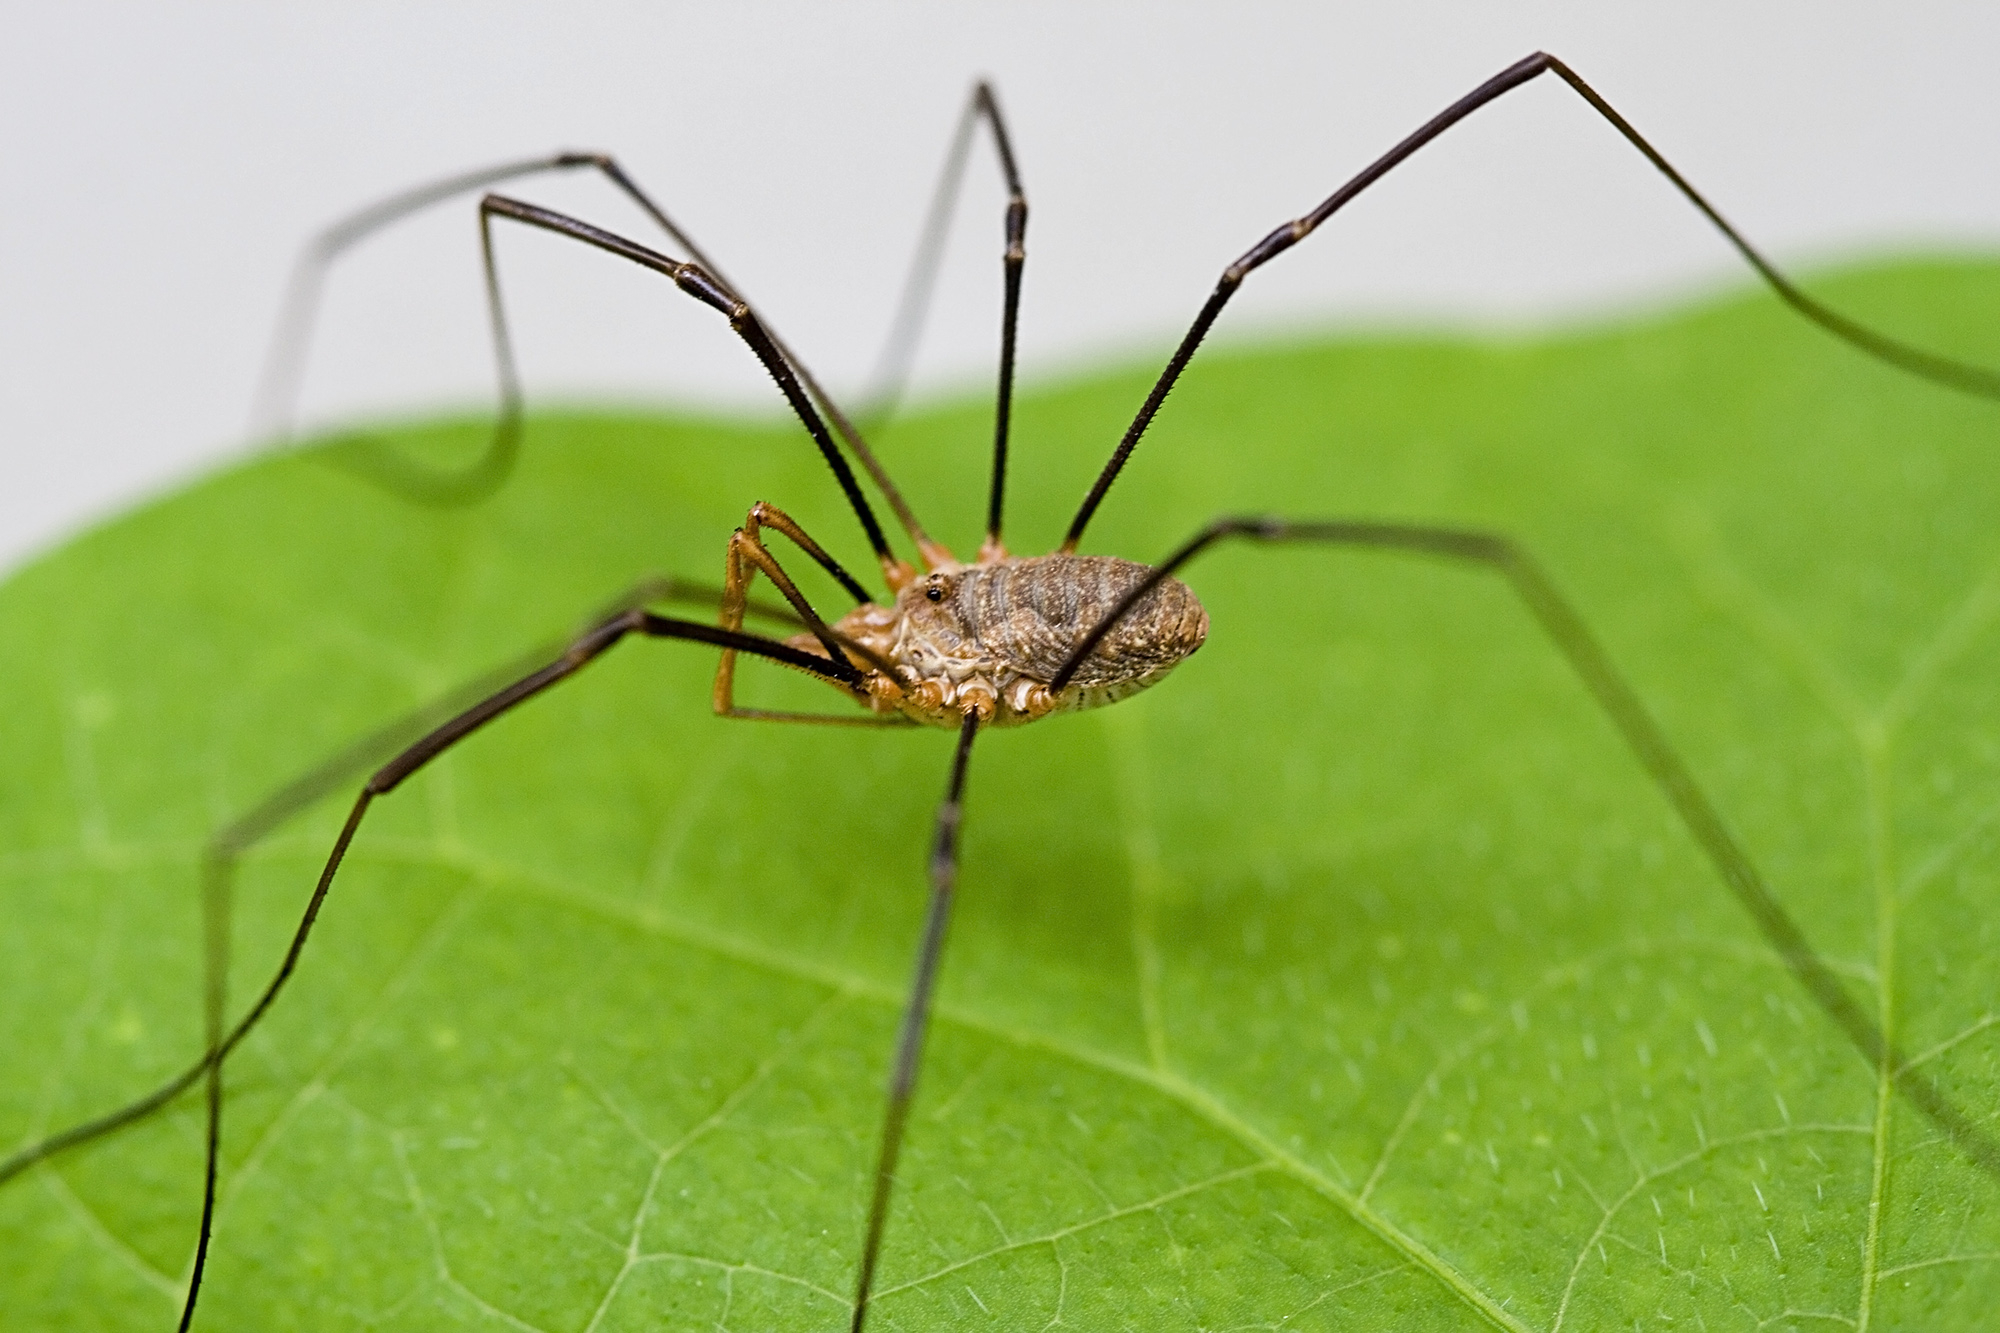 Despite the myth, daddy Longlegs are not the most venomous spiders in the world. Also despite the myth, their mandibles are perfectly capable of piercing human flesh. The spider has very little venom, which causes seconds of mild discomfort on human skin. Learn more on <a href="http://spiders.ucr.edu/daddylonglegs.html" target="_blank">UCR.edu</a>.